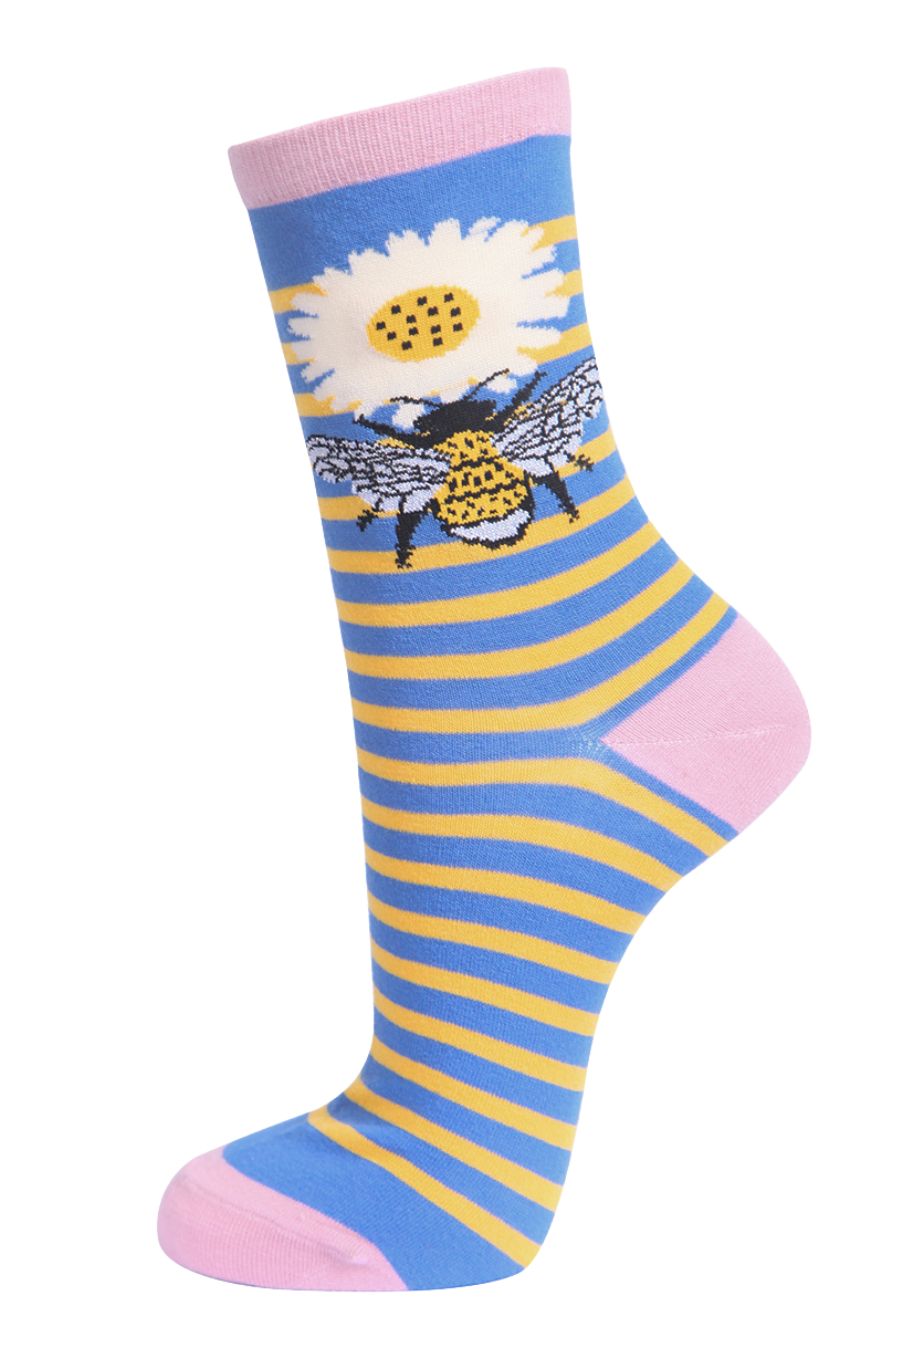 Large Bee and sunflower bamboo socks